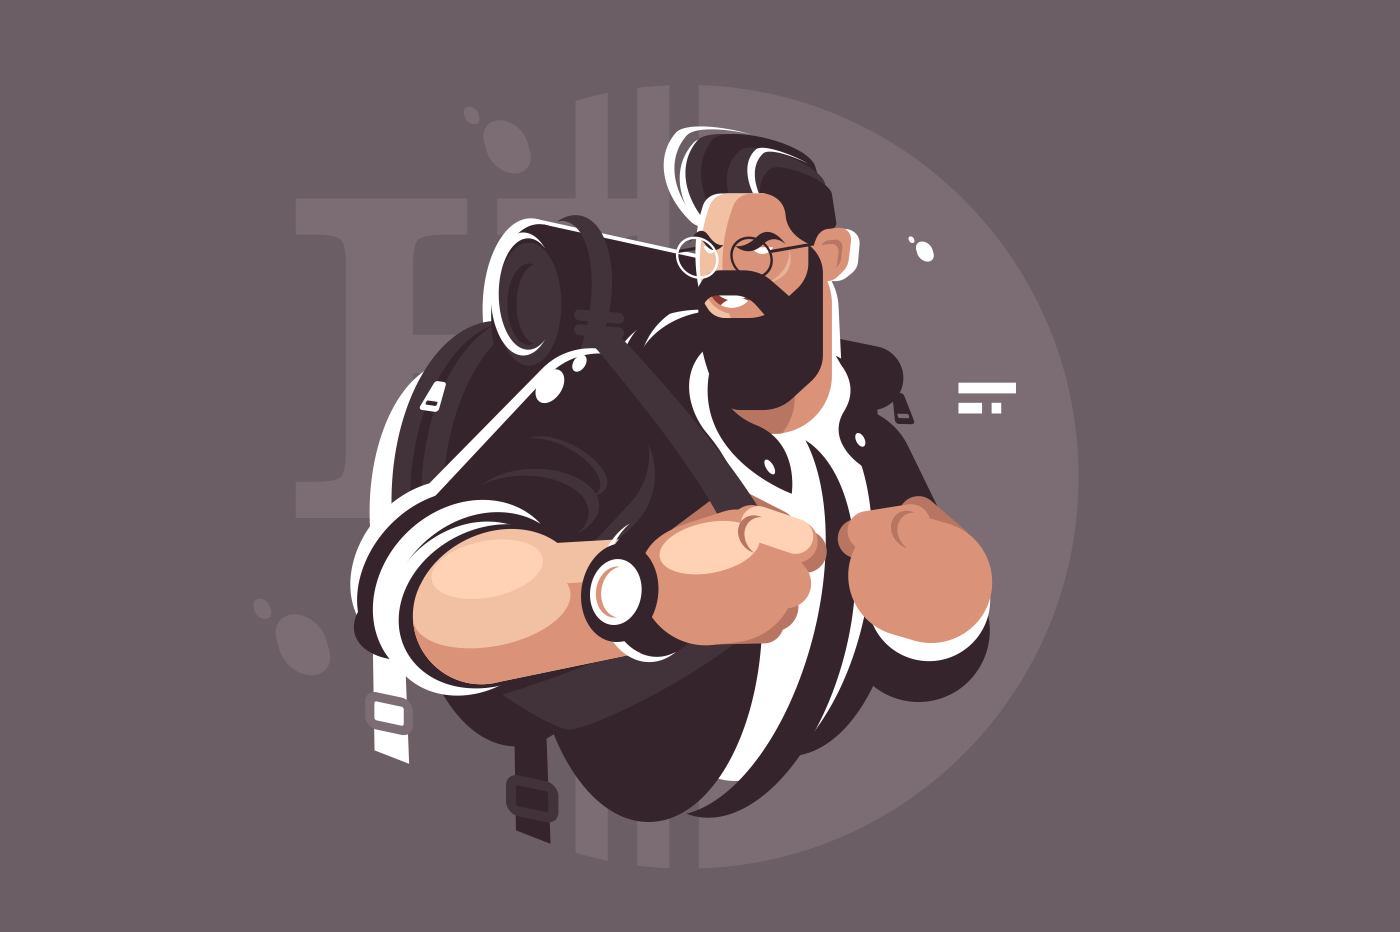 Decisive hipster ready to act. Concept man with beard, watch, backpack in suit ready to travel, work, battle, hr. Vector illustration.